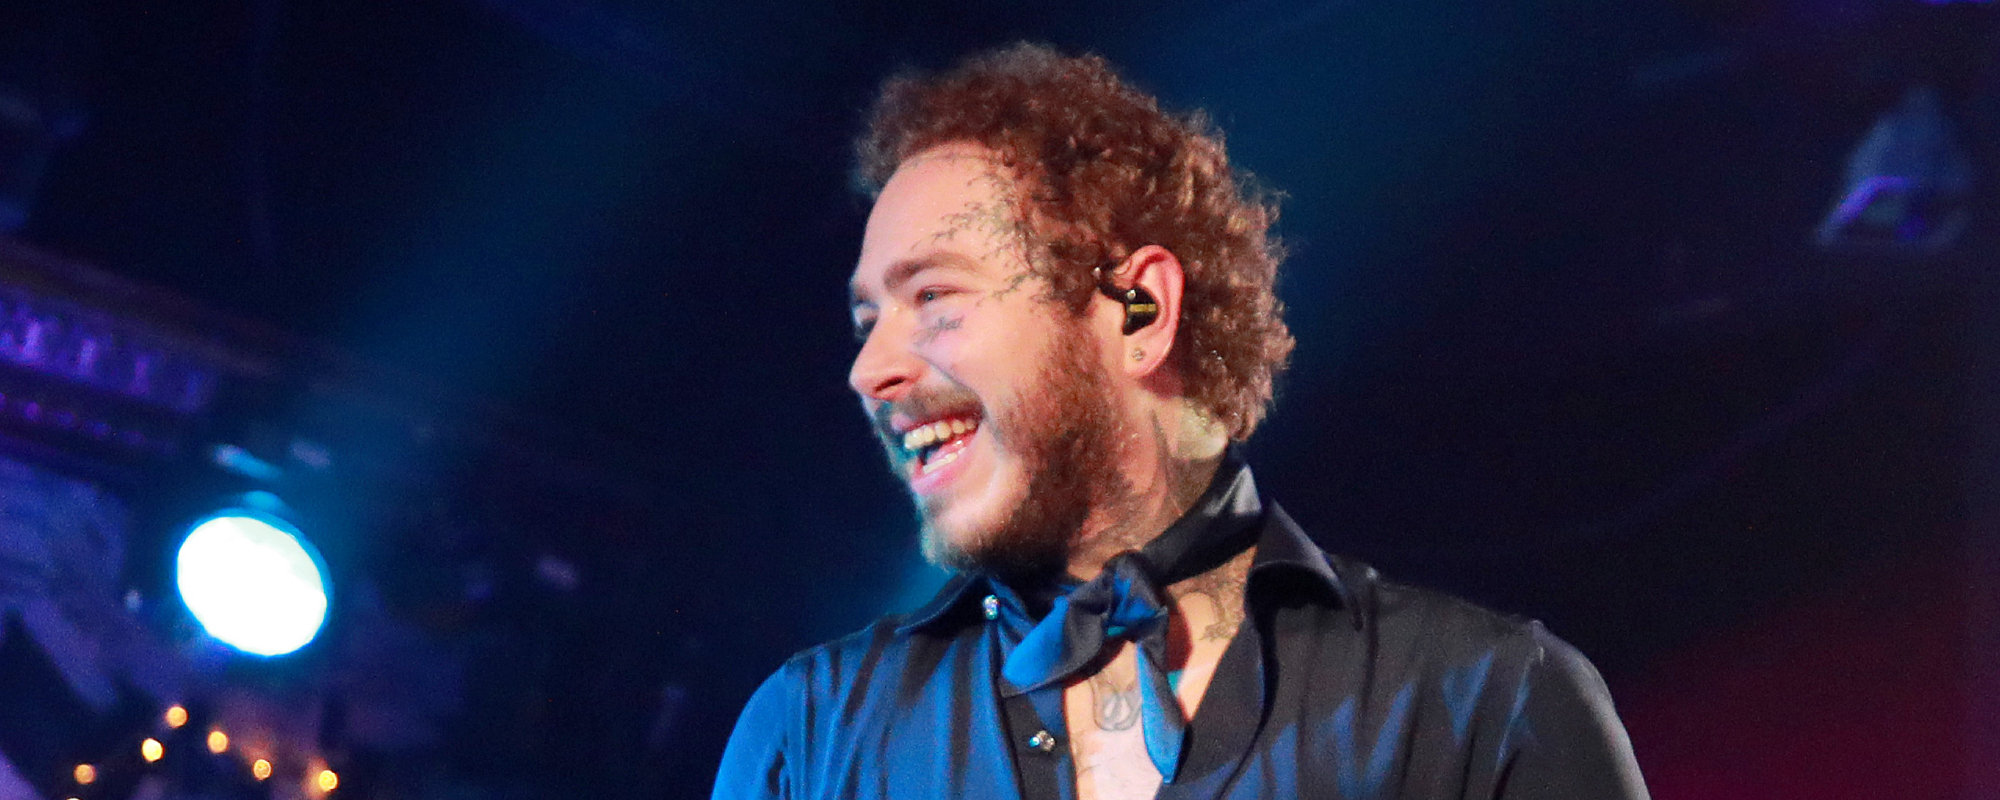 Post Malone Predicted His Entrance Into Country Music Nearly a Decade Ago